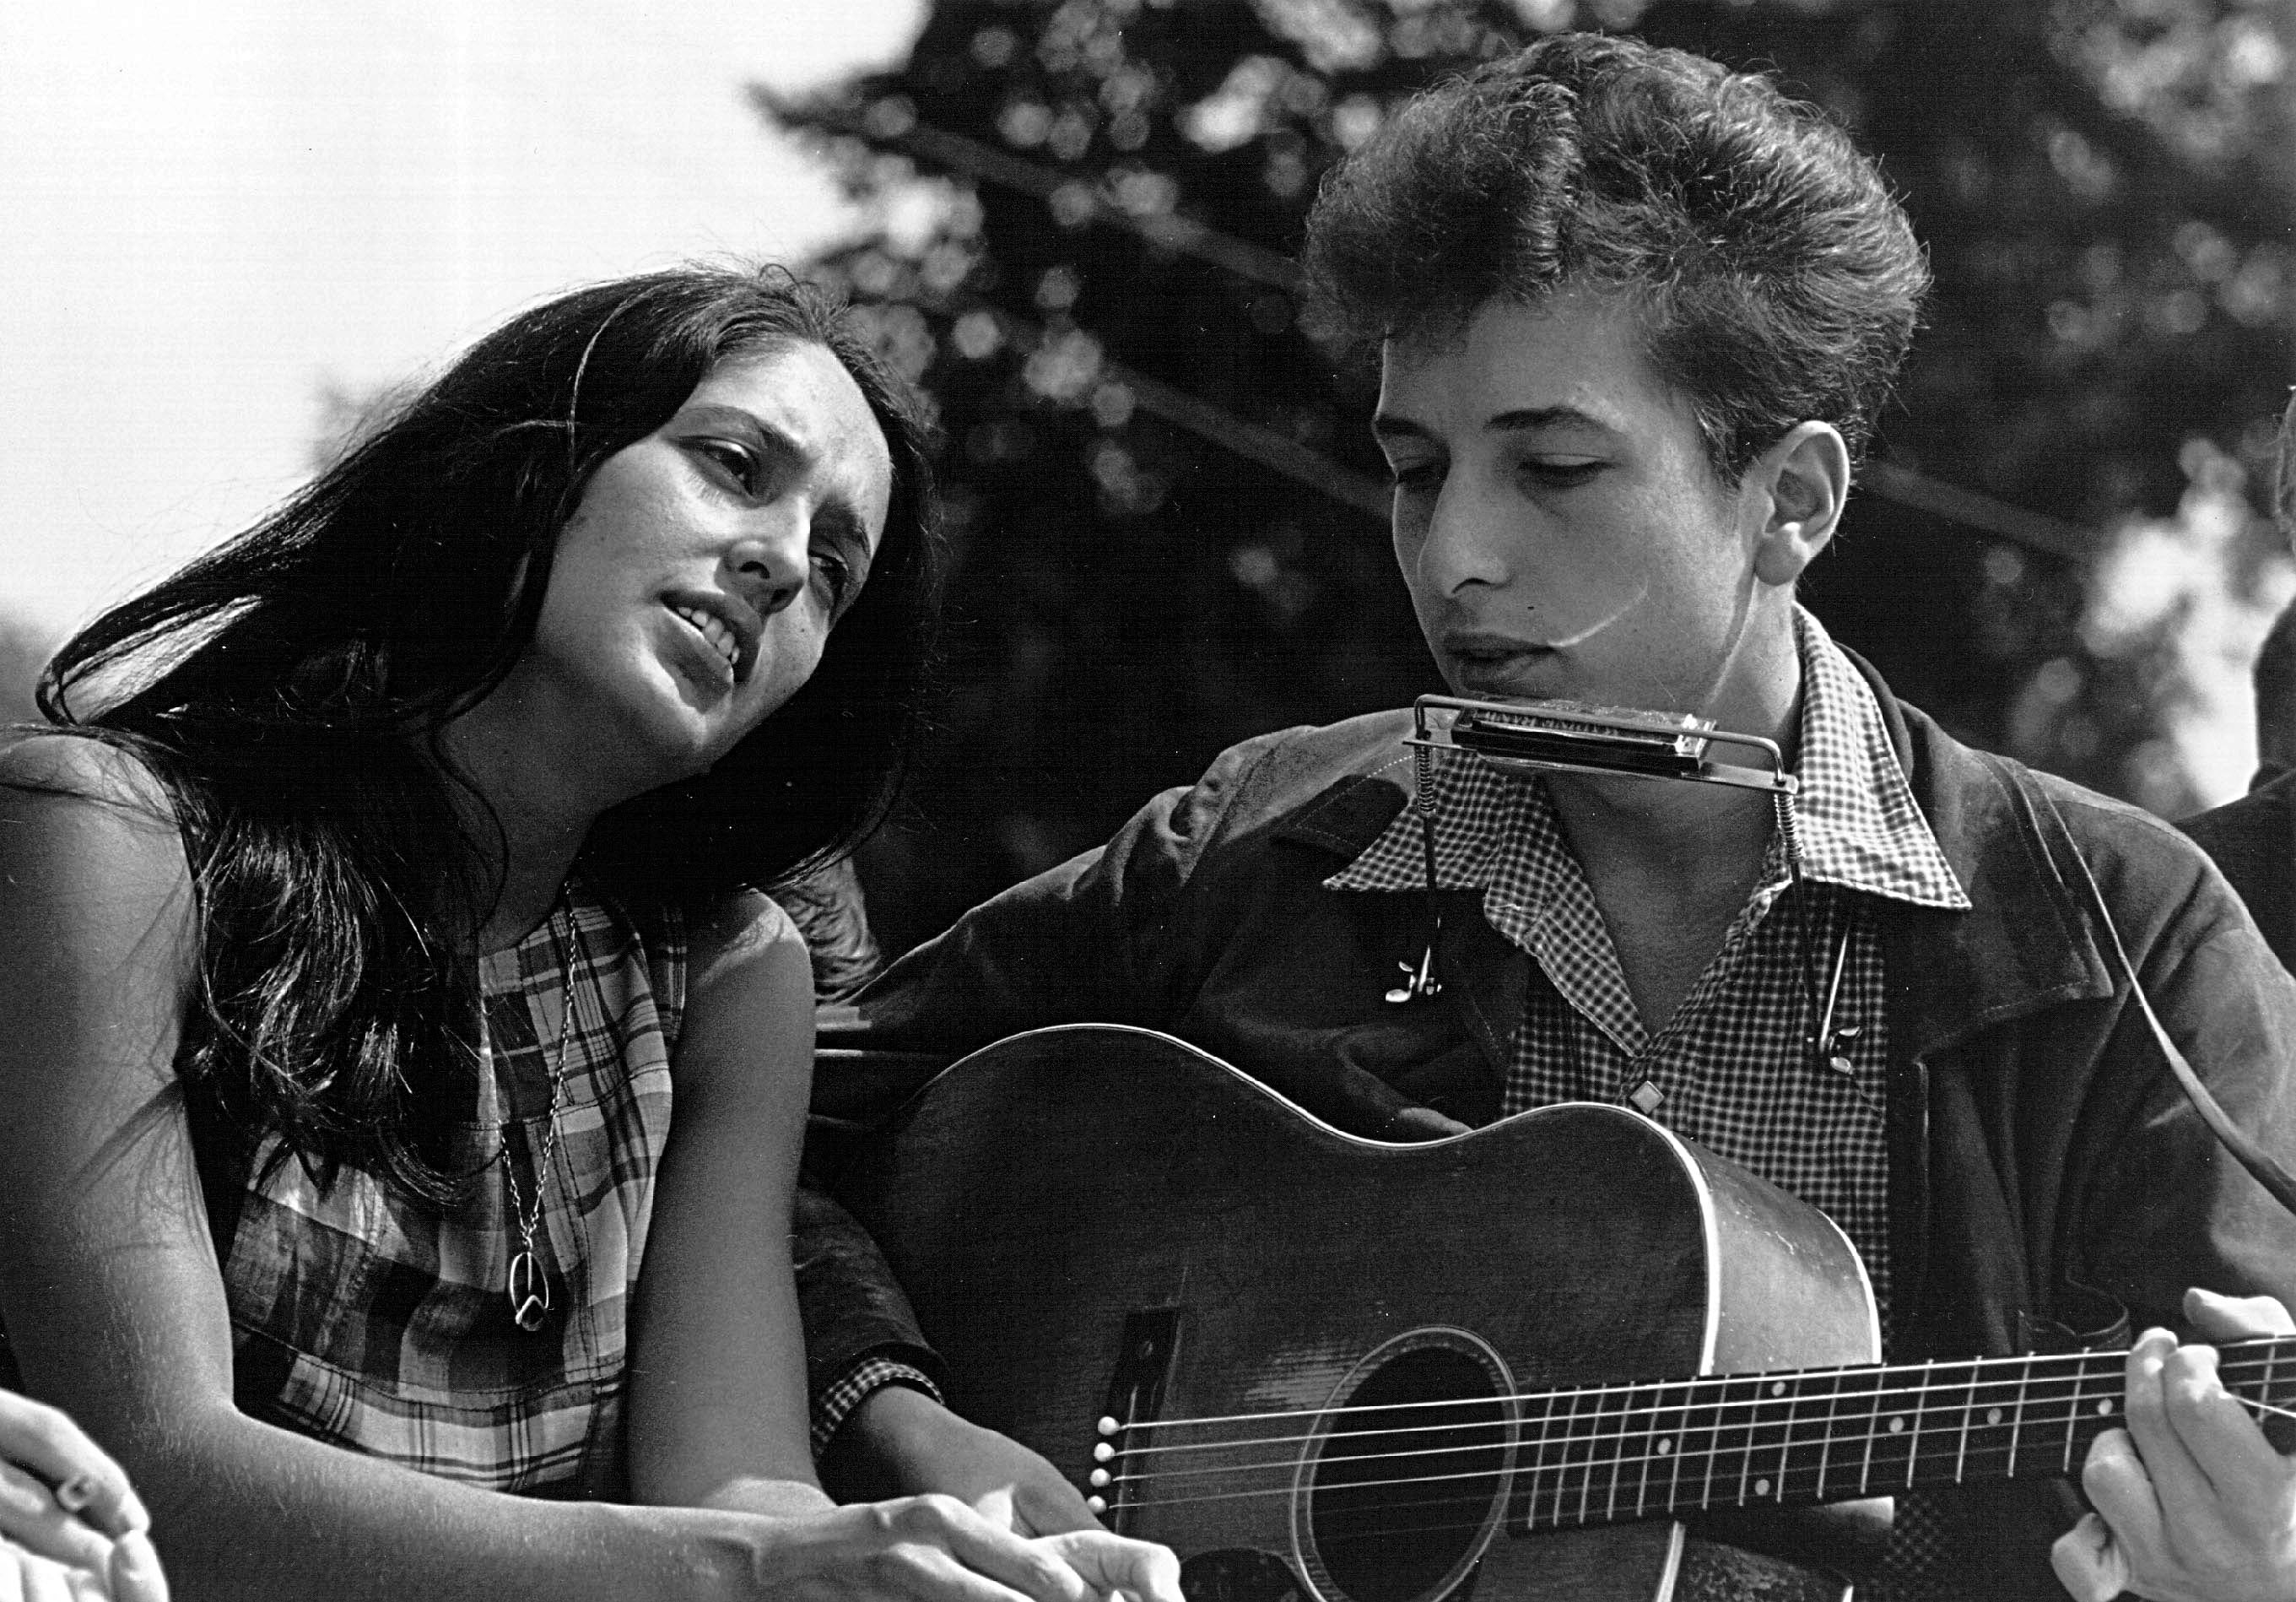 Joan Baez and Bob Dylan performing at the March on Washington for Jobs and Freedom in August 1963